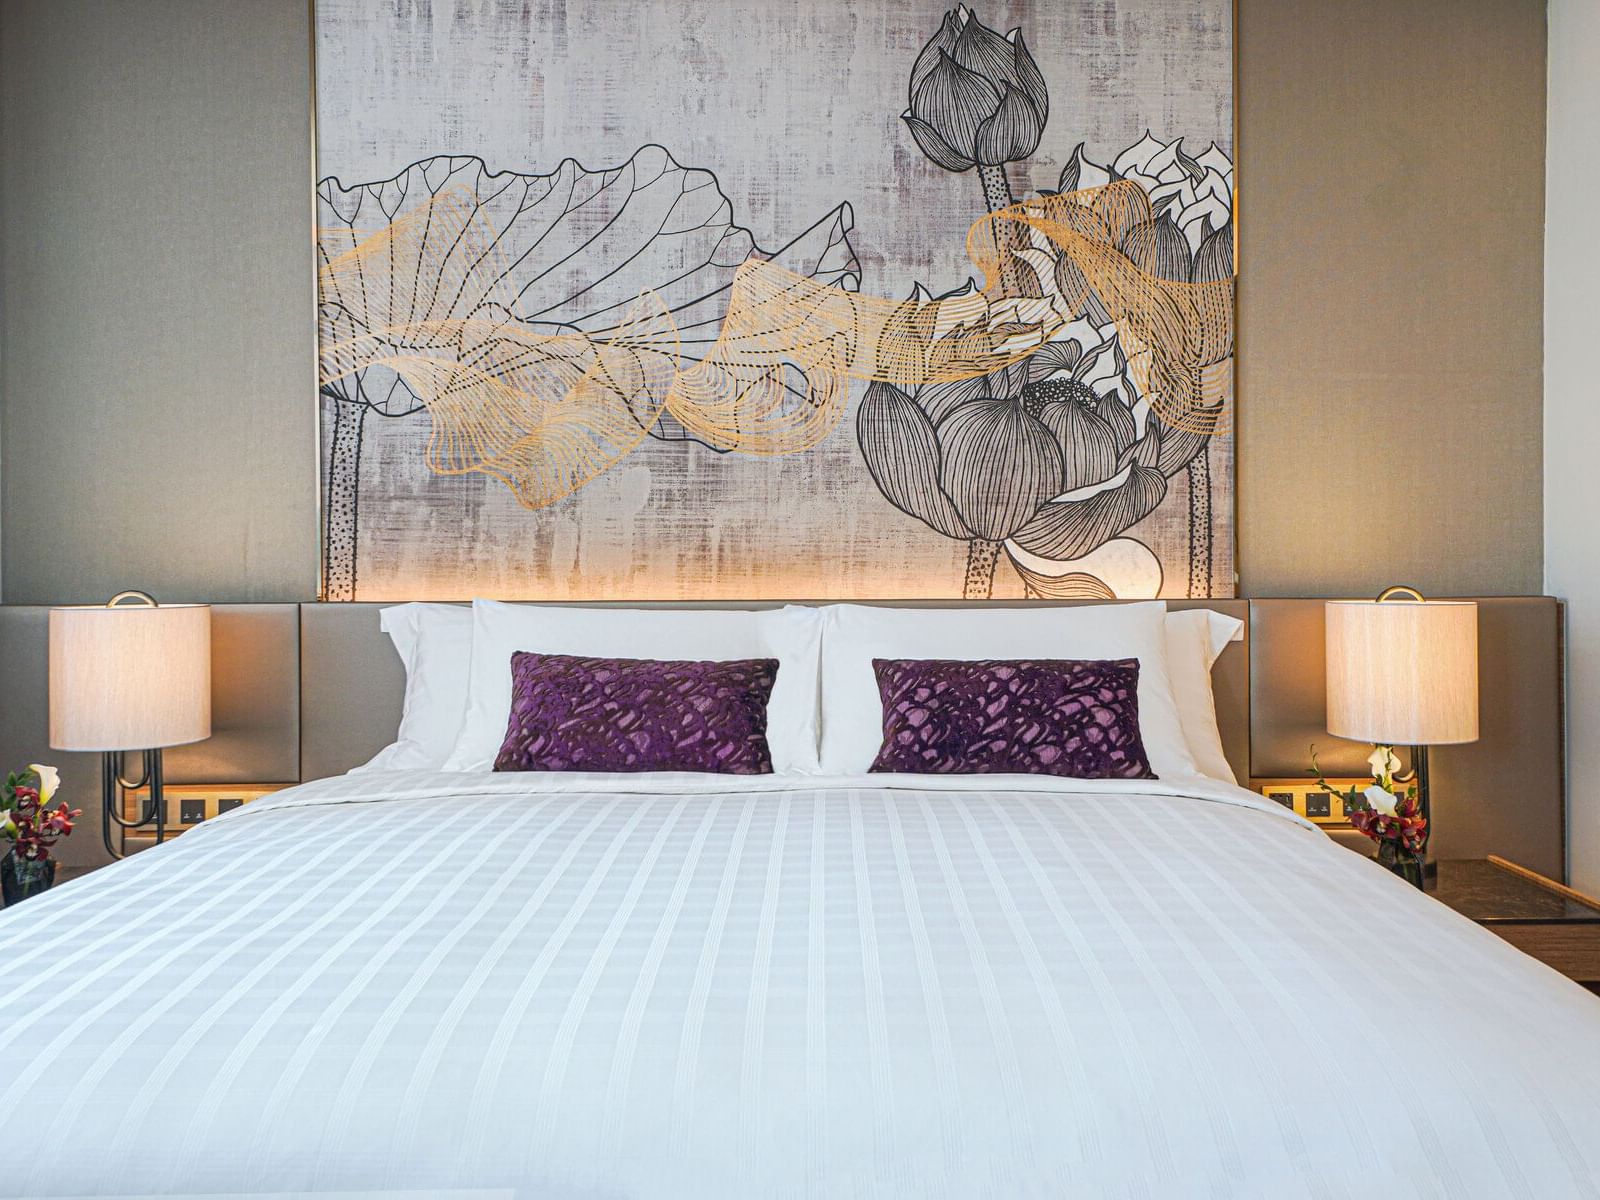 An inviting bed adorned with pristine white sheets and plush purple pillows, offering comfort and relaxation